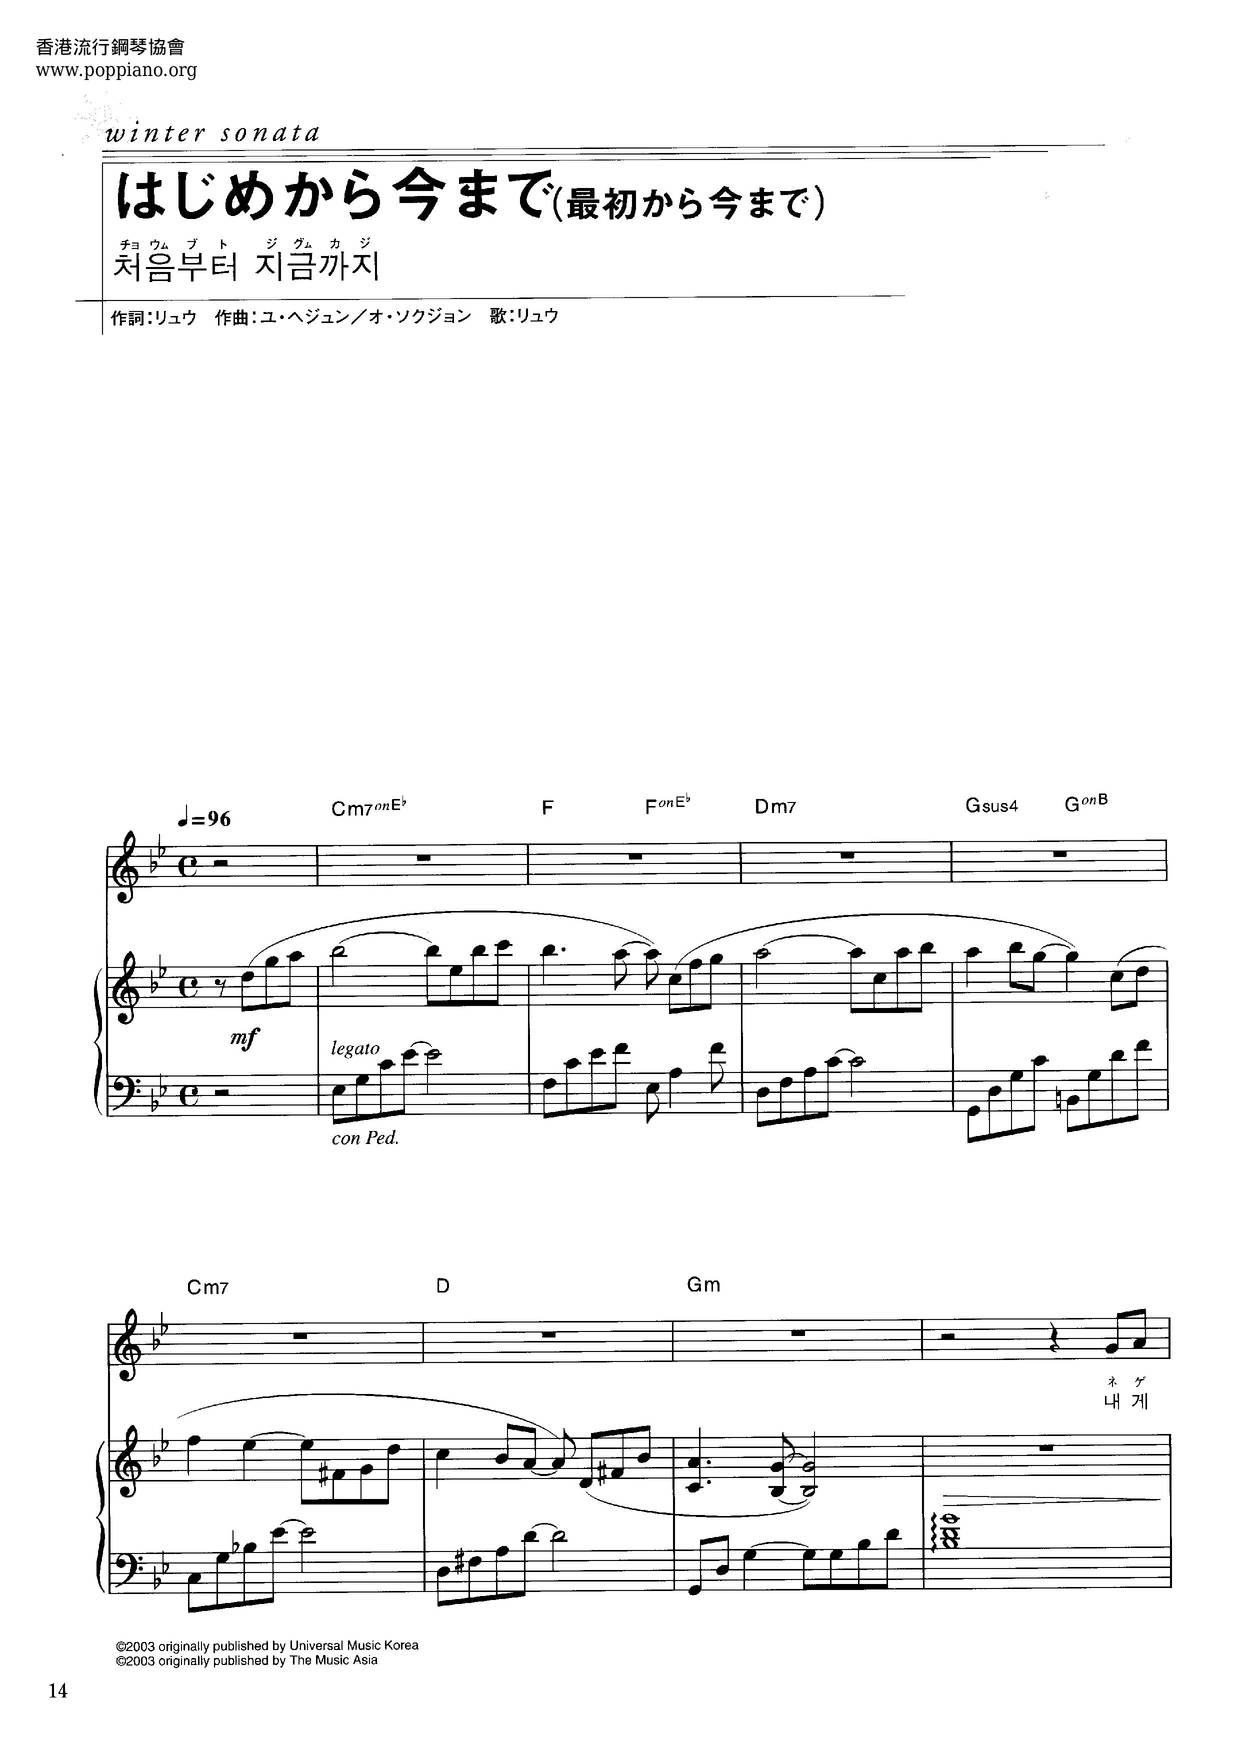 Winter Sonata-from The Beginning To The Present Score